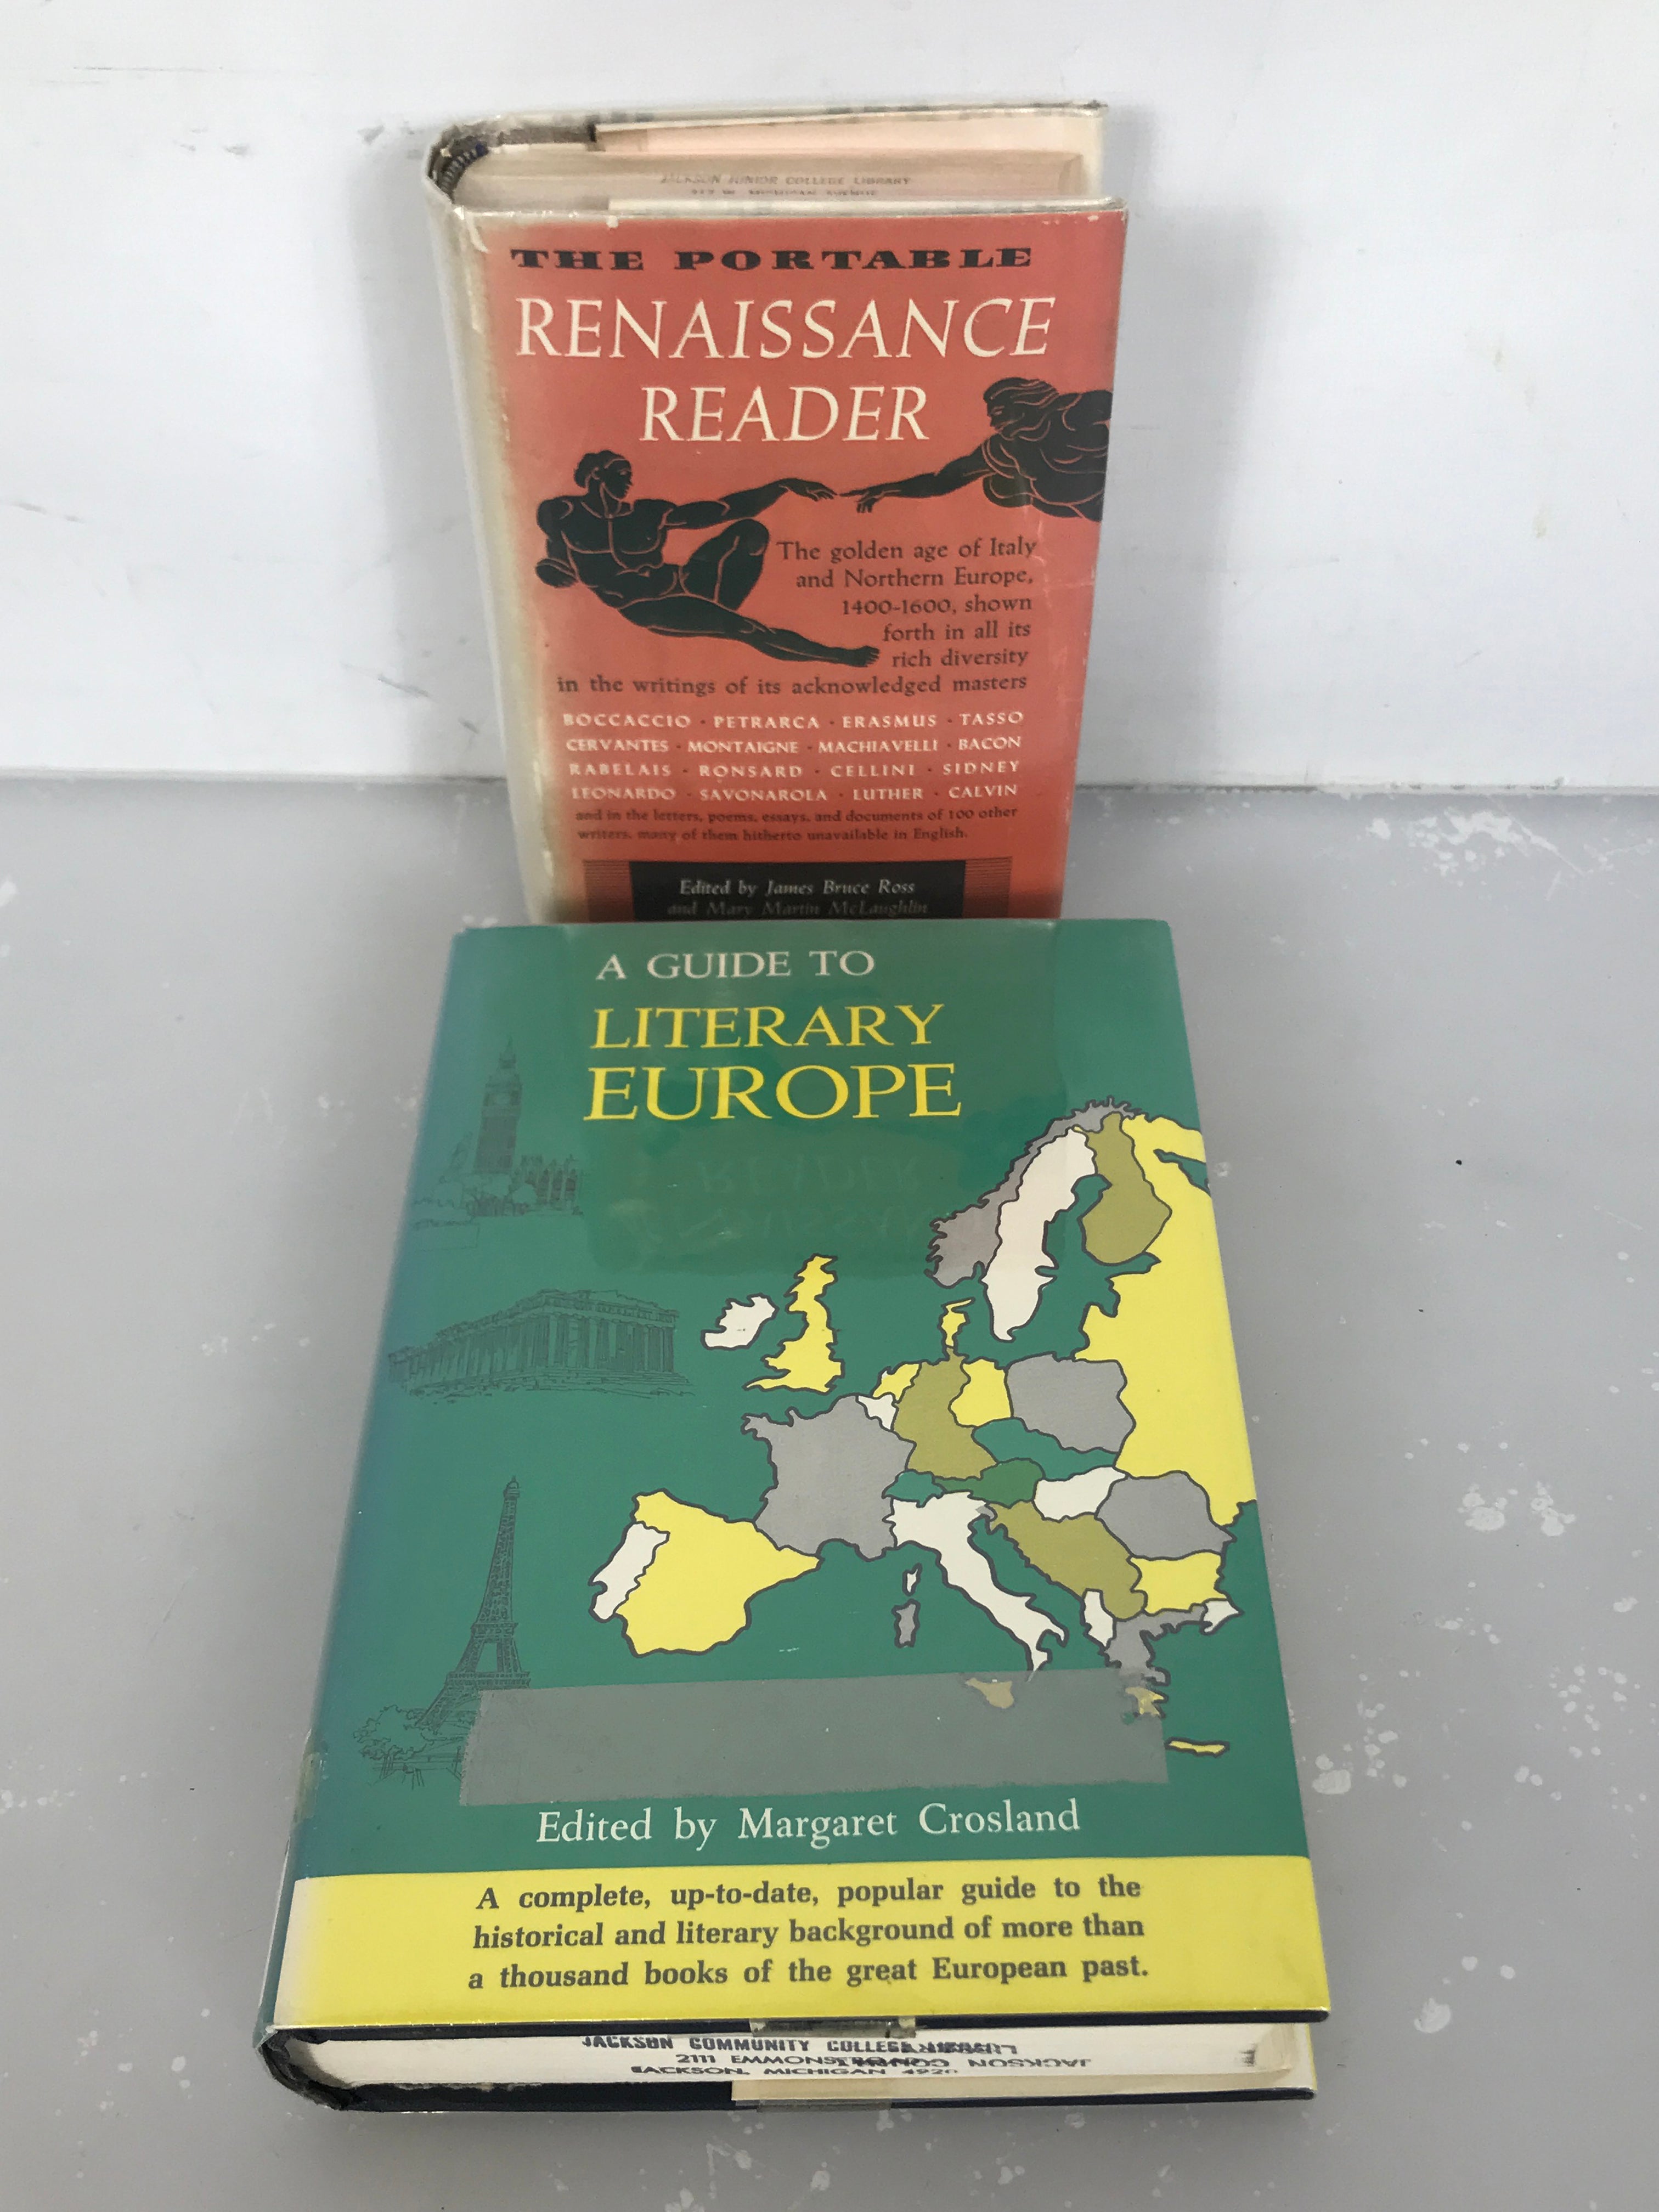 Lot of 2: The Portable Renaissance Reader and A Guide to Literary Europe HC DJ